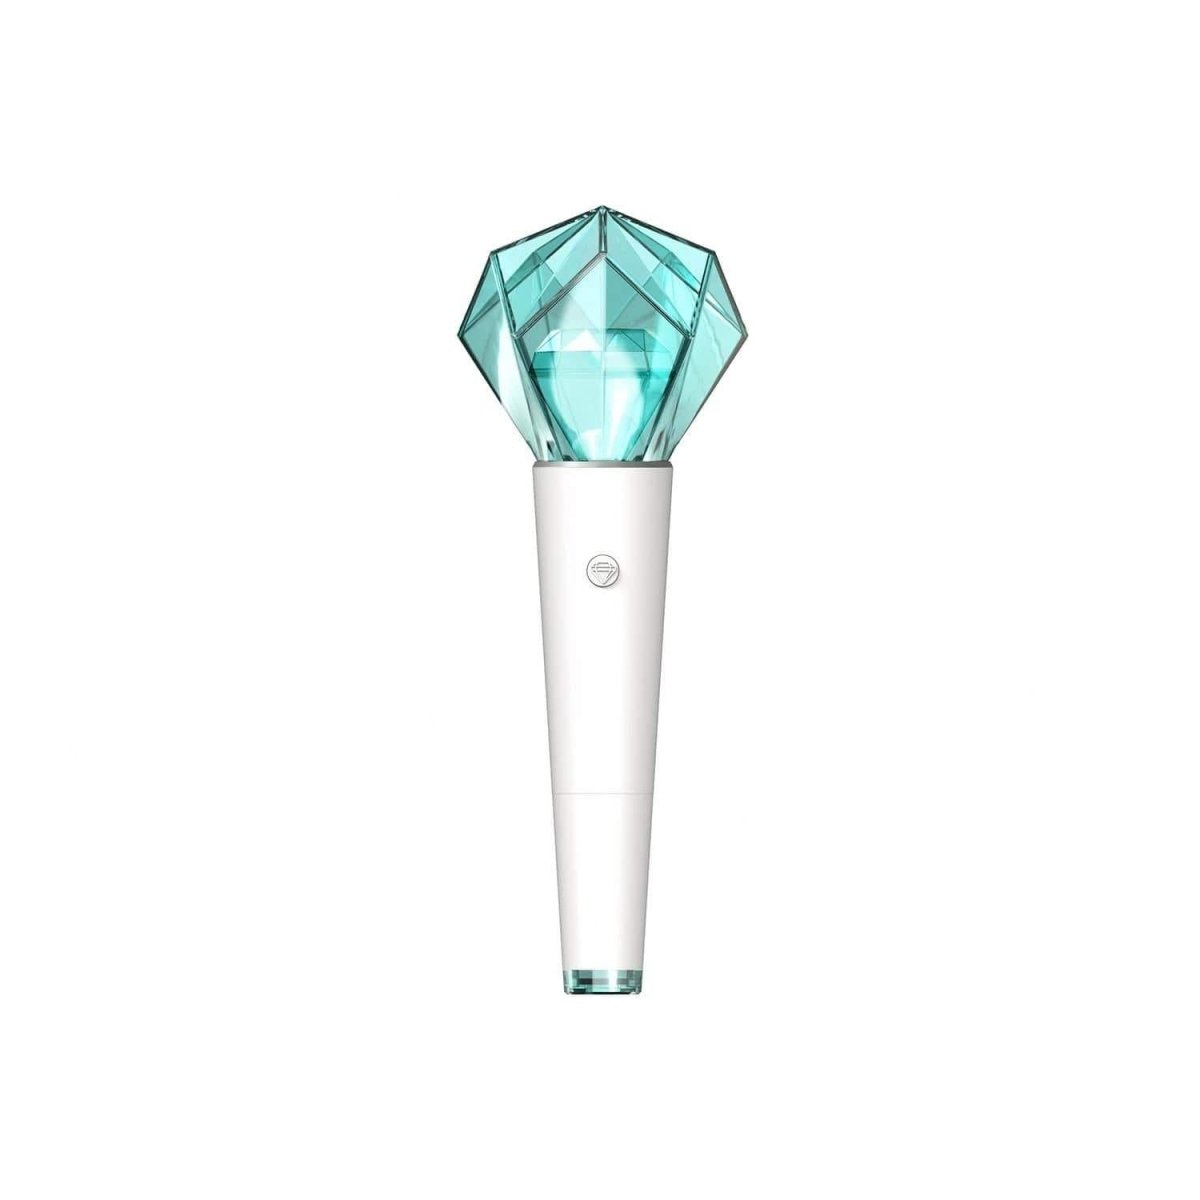 SHINee OFFICIAL LIGHT STICK - KAVE SQUARE